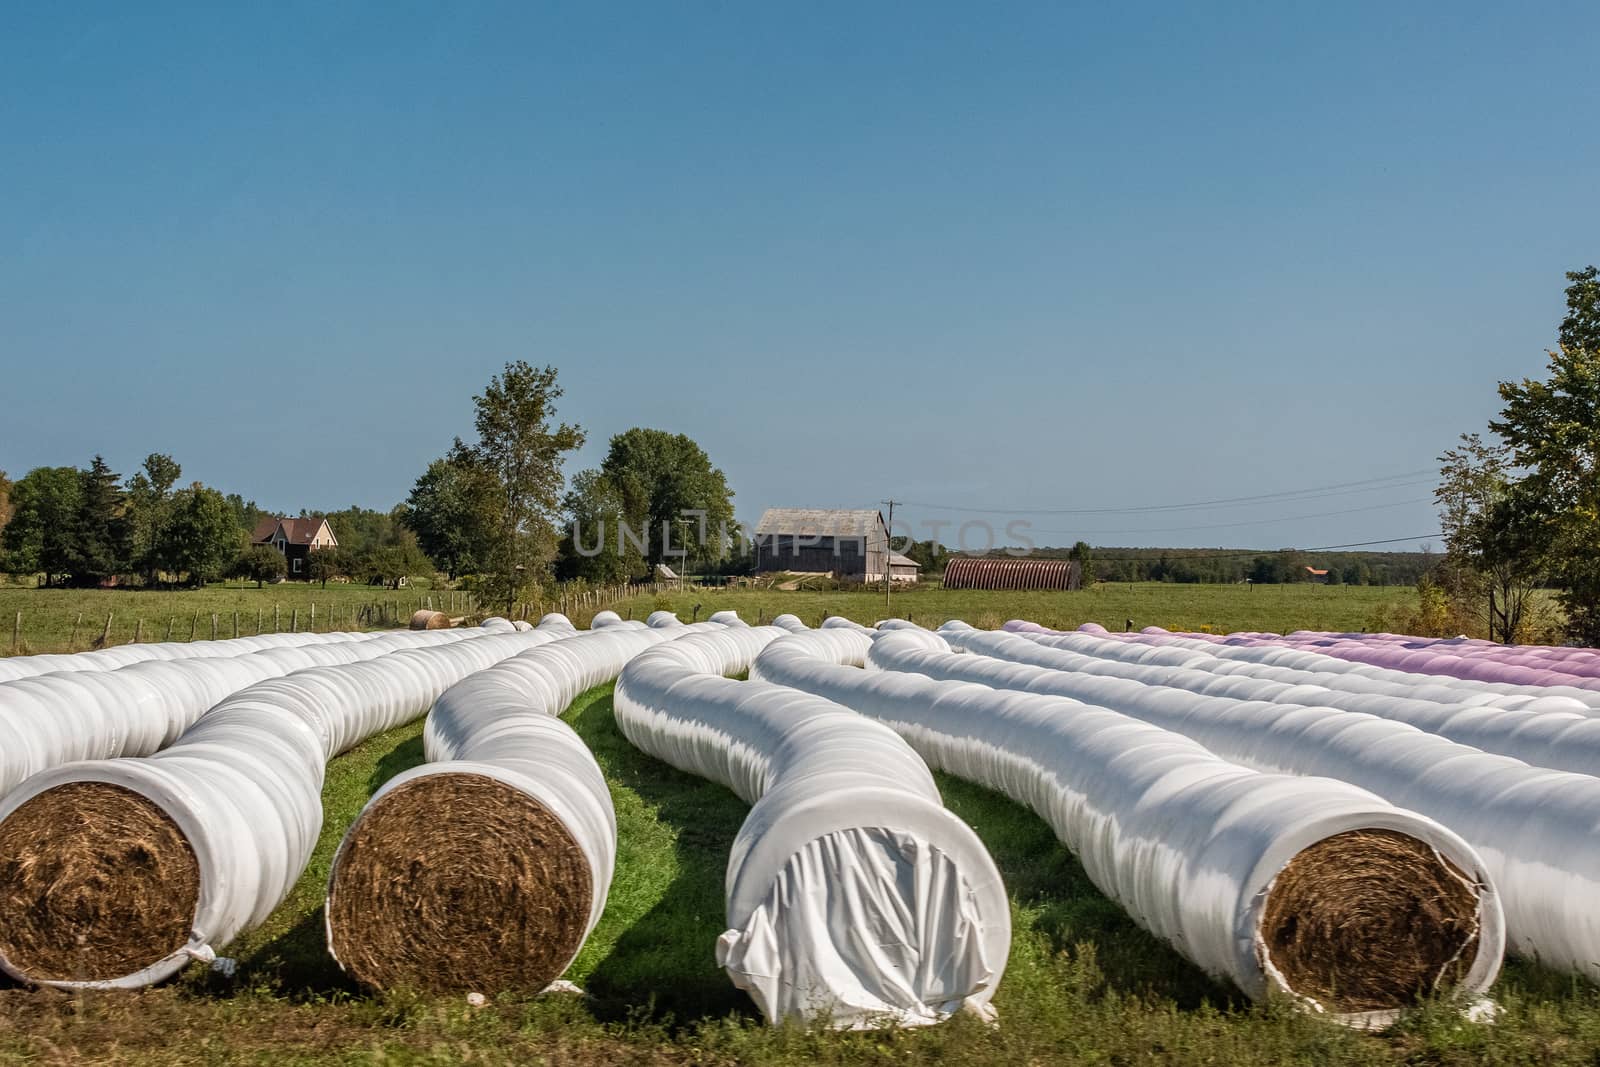 The  farmer neatly packed the hay into rolls and wrapped them in two-color polyethylene